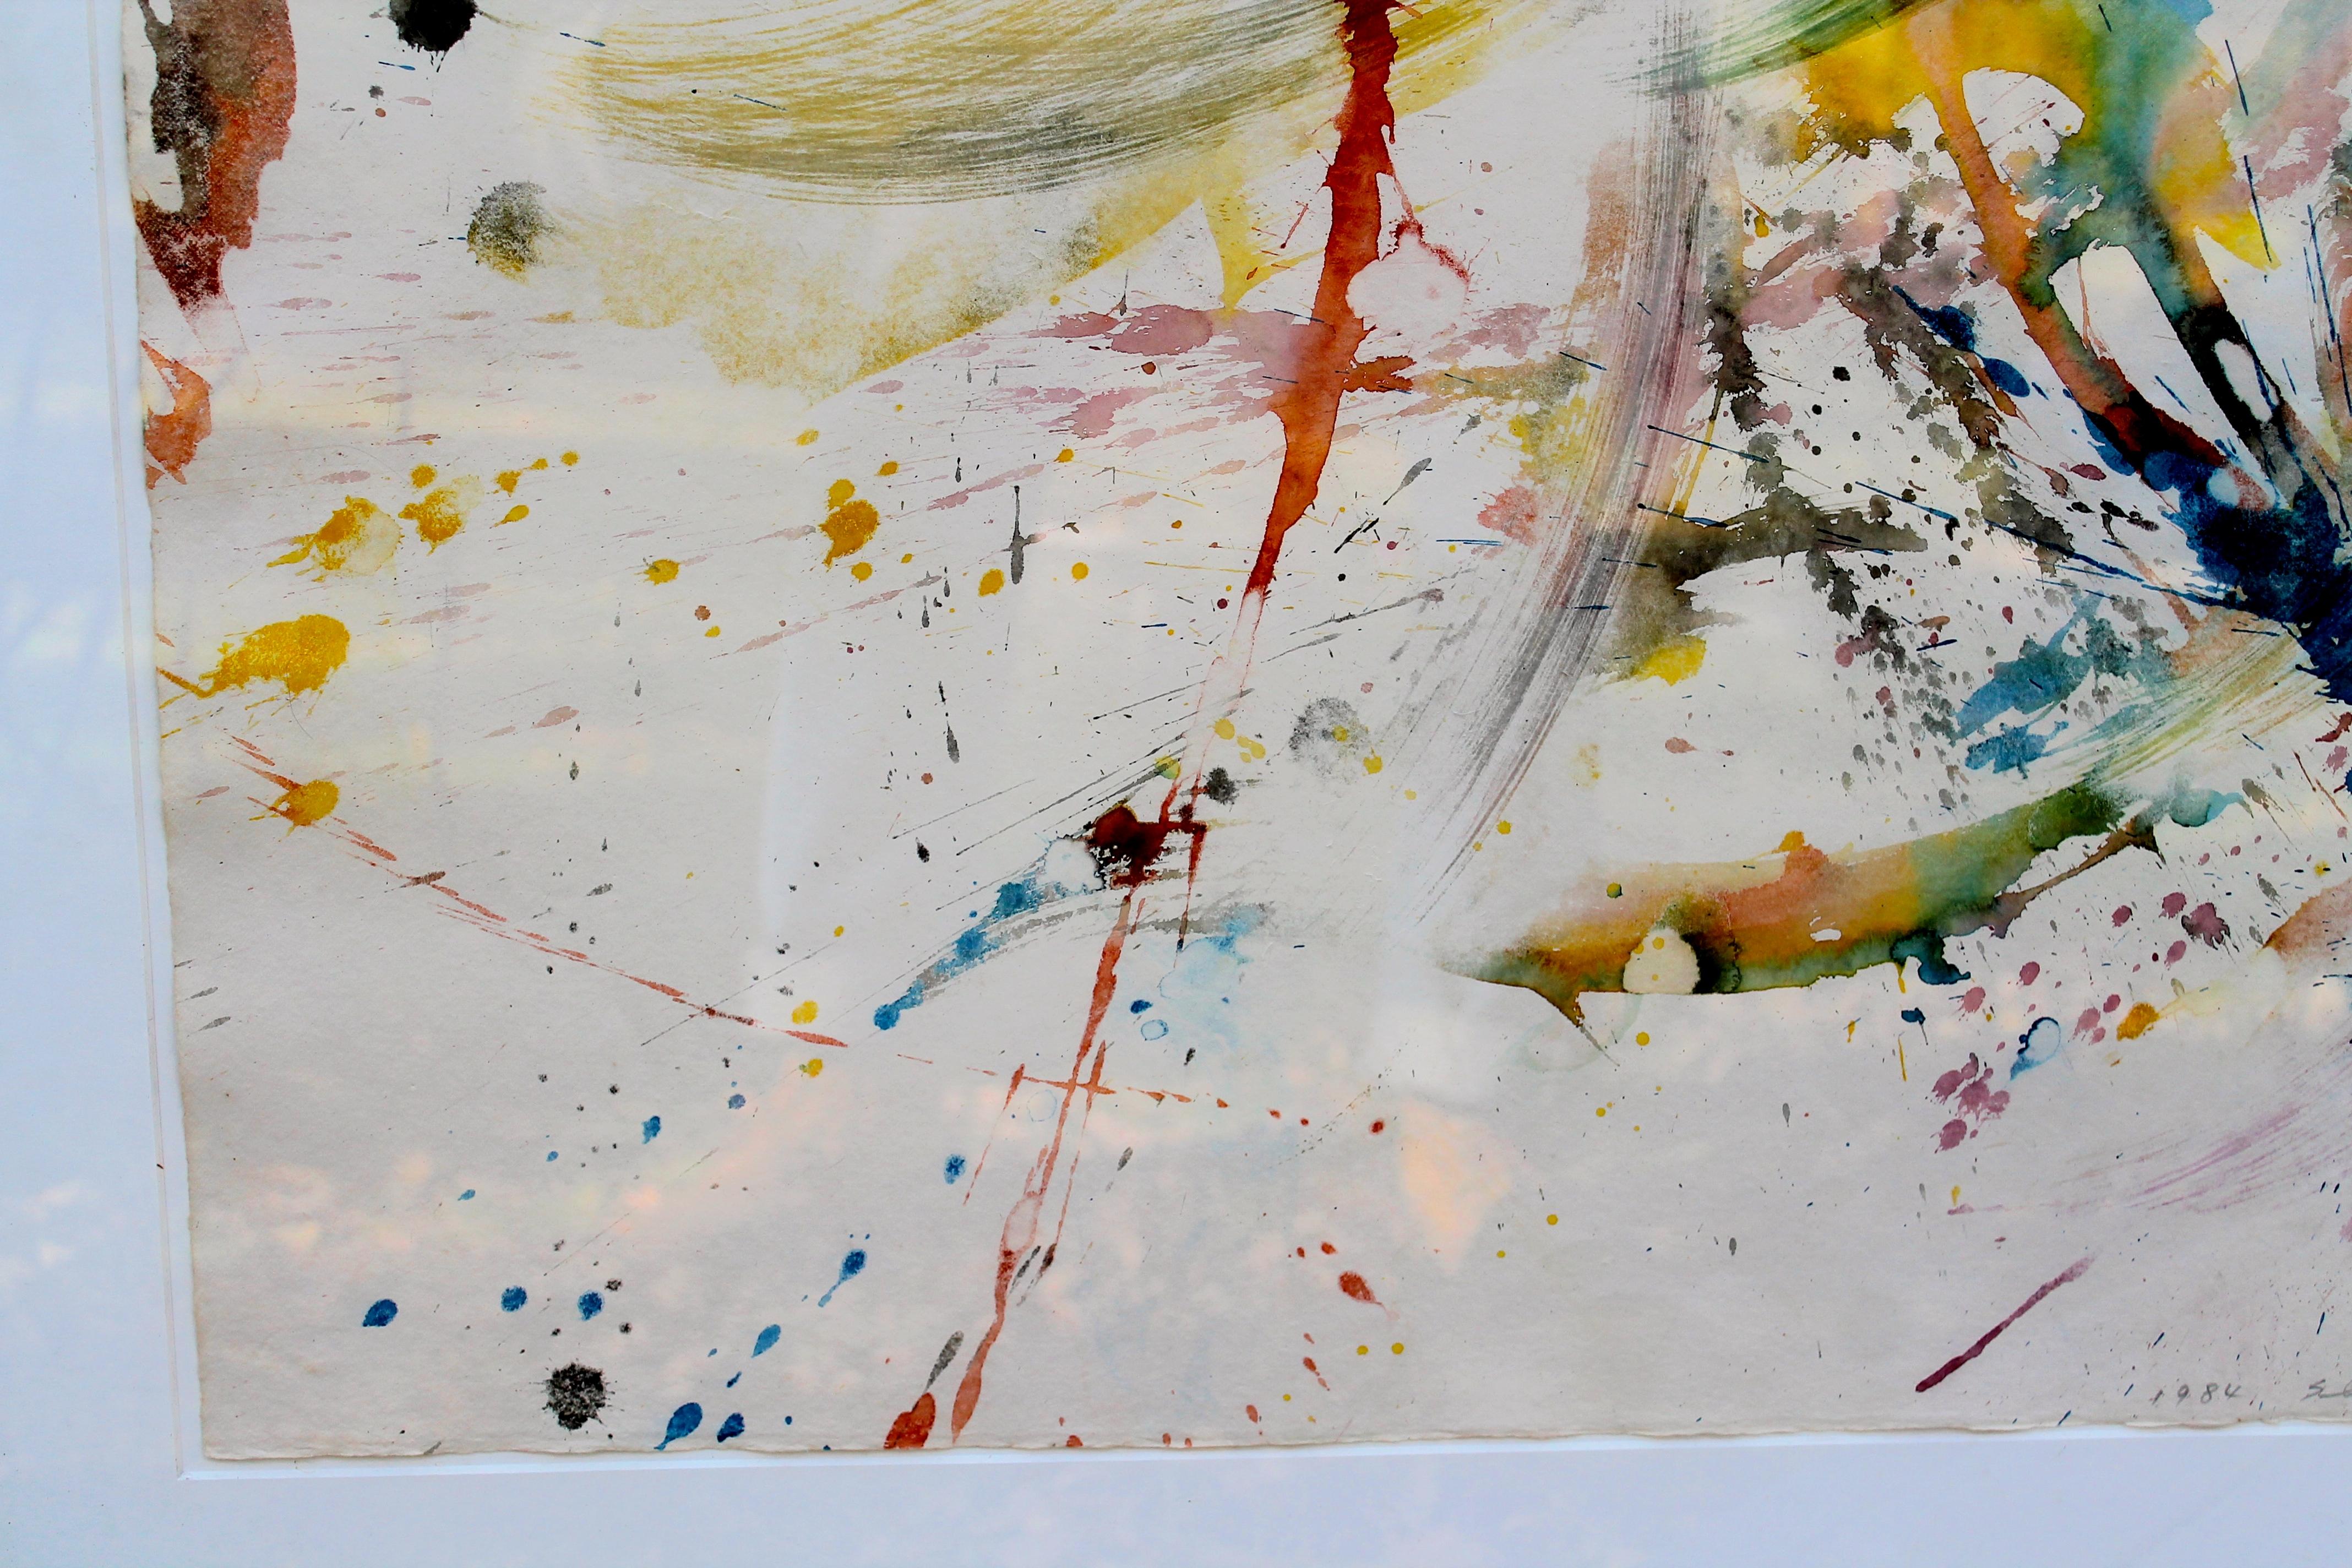 Japanese Shingo Honda  'To White Space' Series Abstract Expressionist Watercolor For Sale